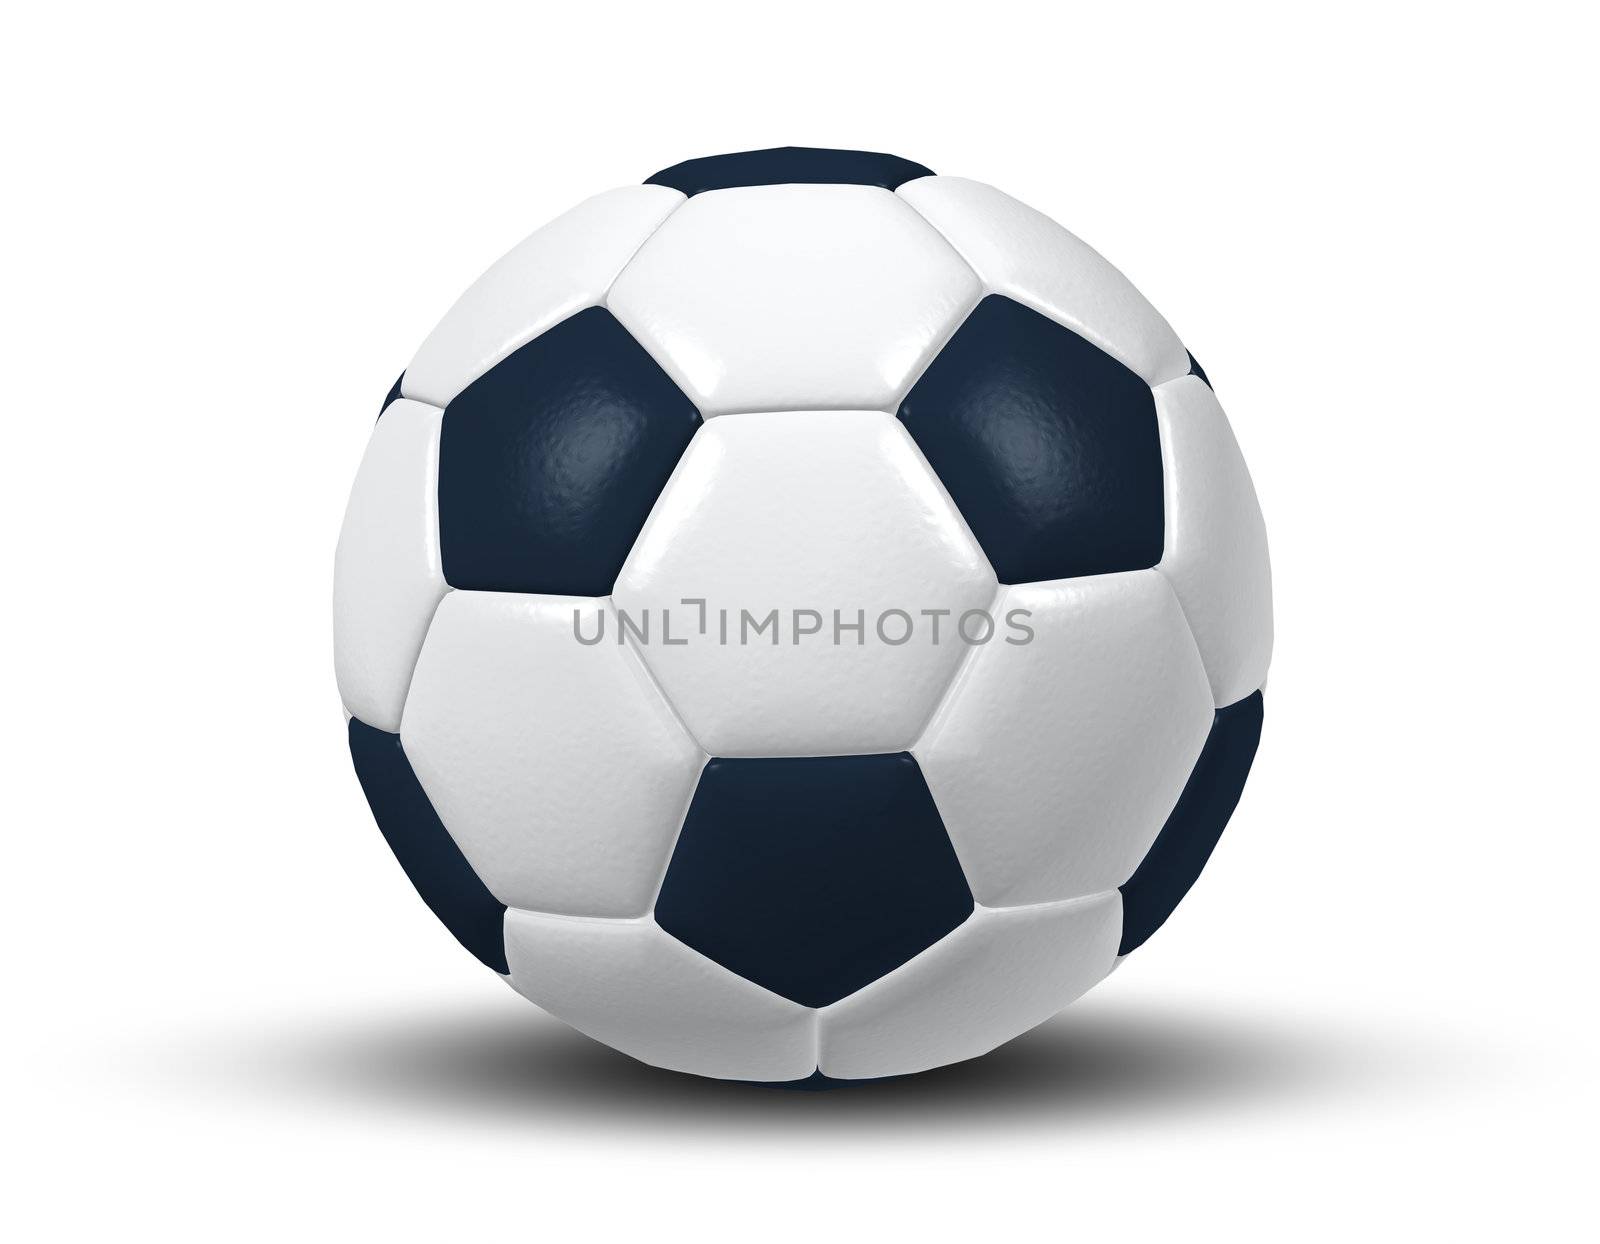 An image of an isolated typical black and white soccer ball